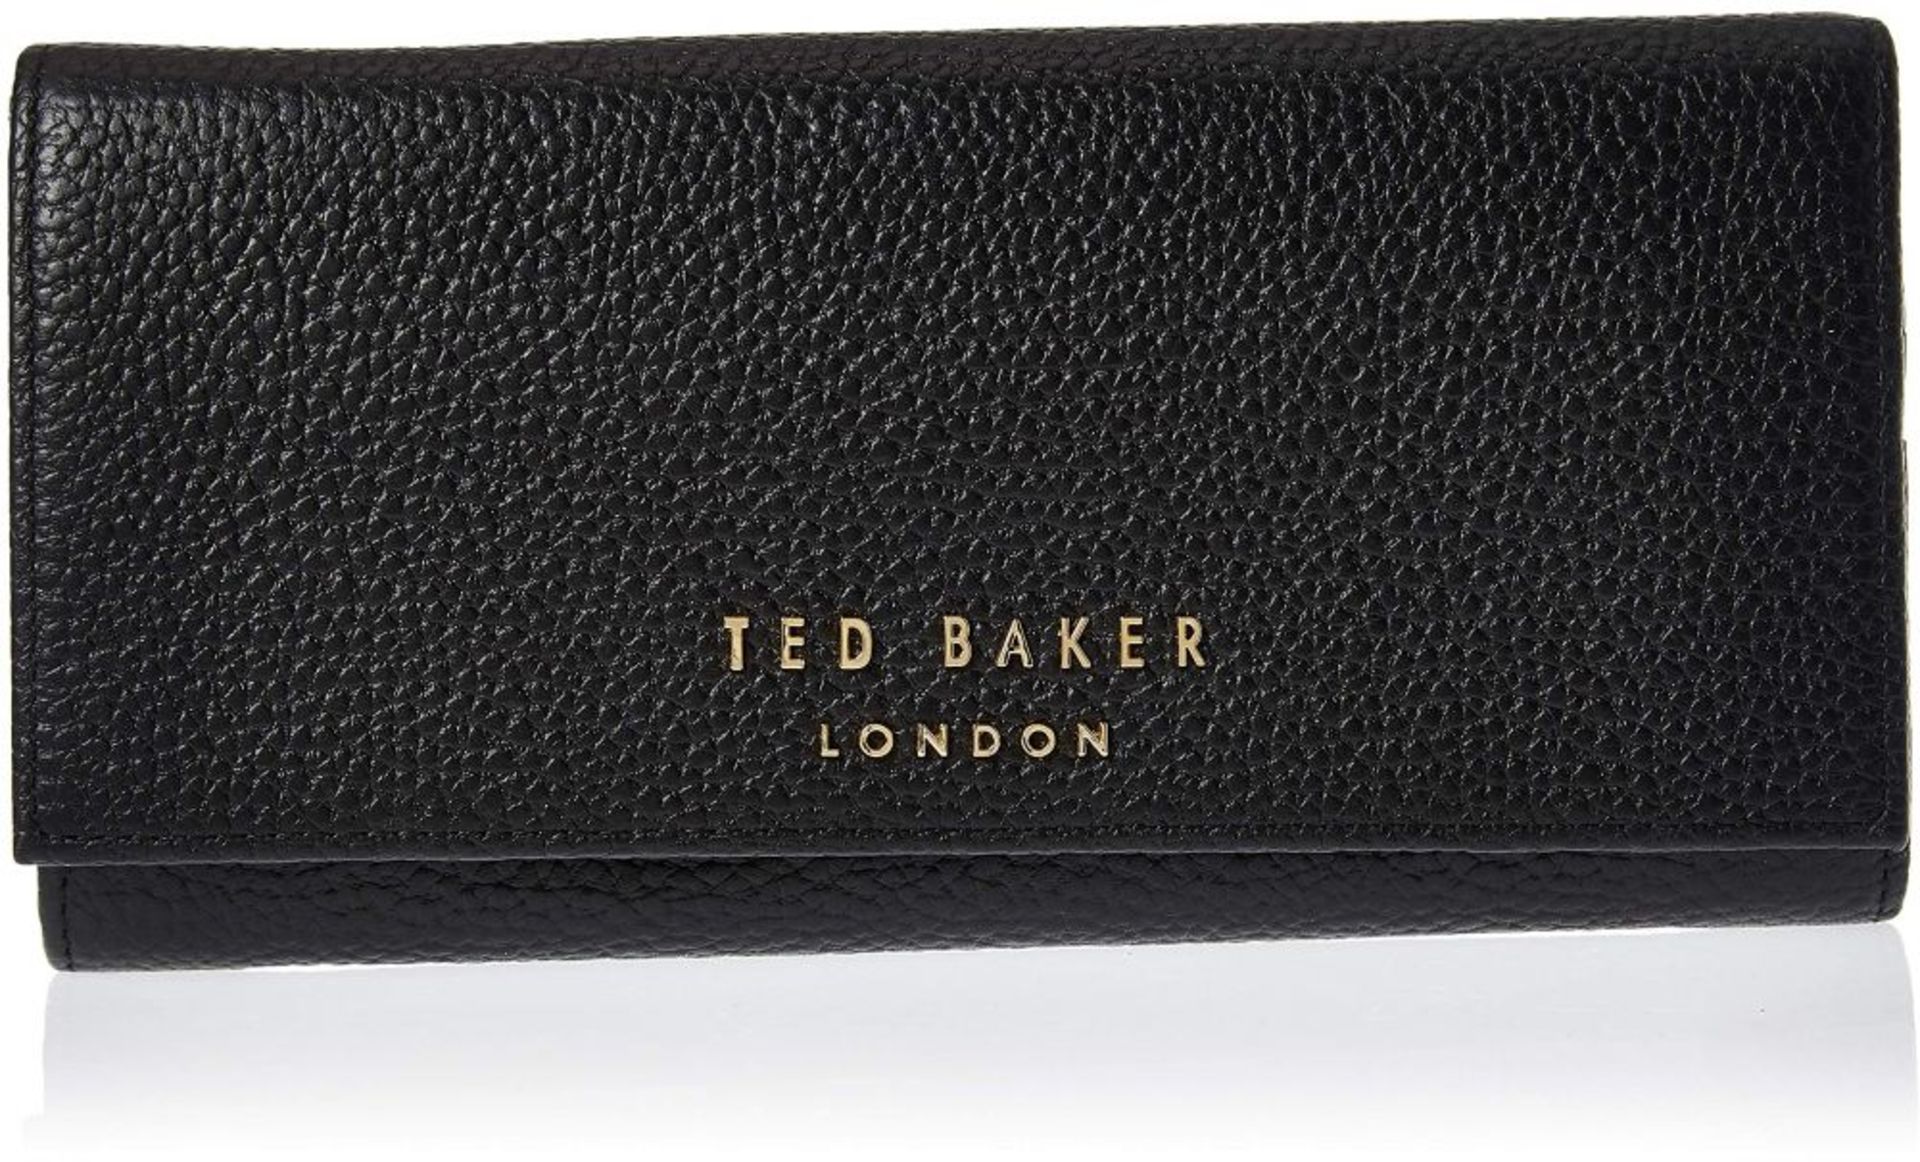 + VAT Brand New Ladies Black Leather Selma Statement Letter Matinee Purse (ISP £89 Ted Baker)